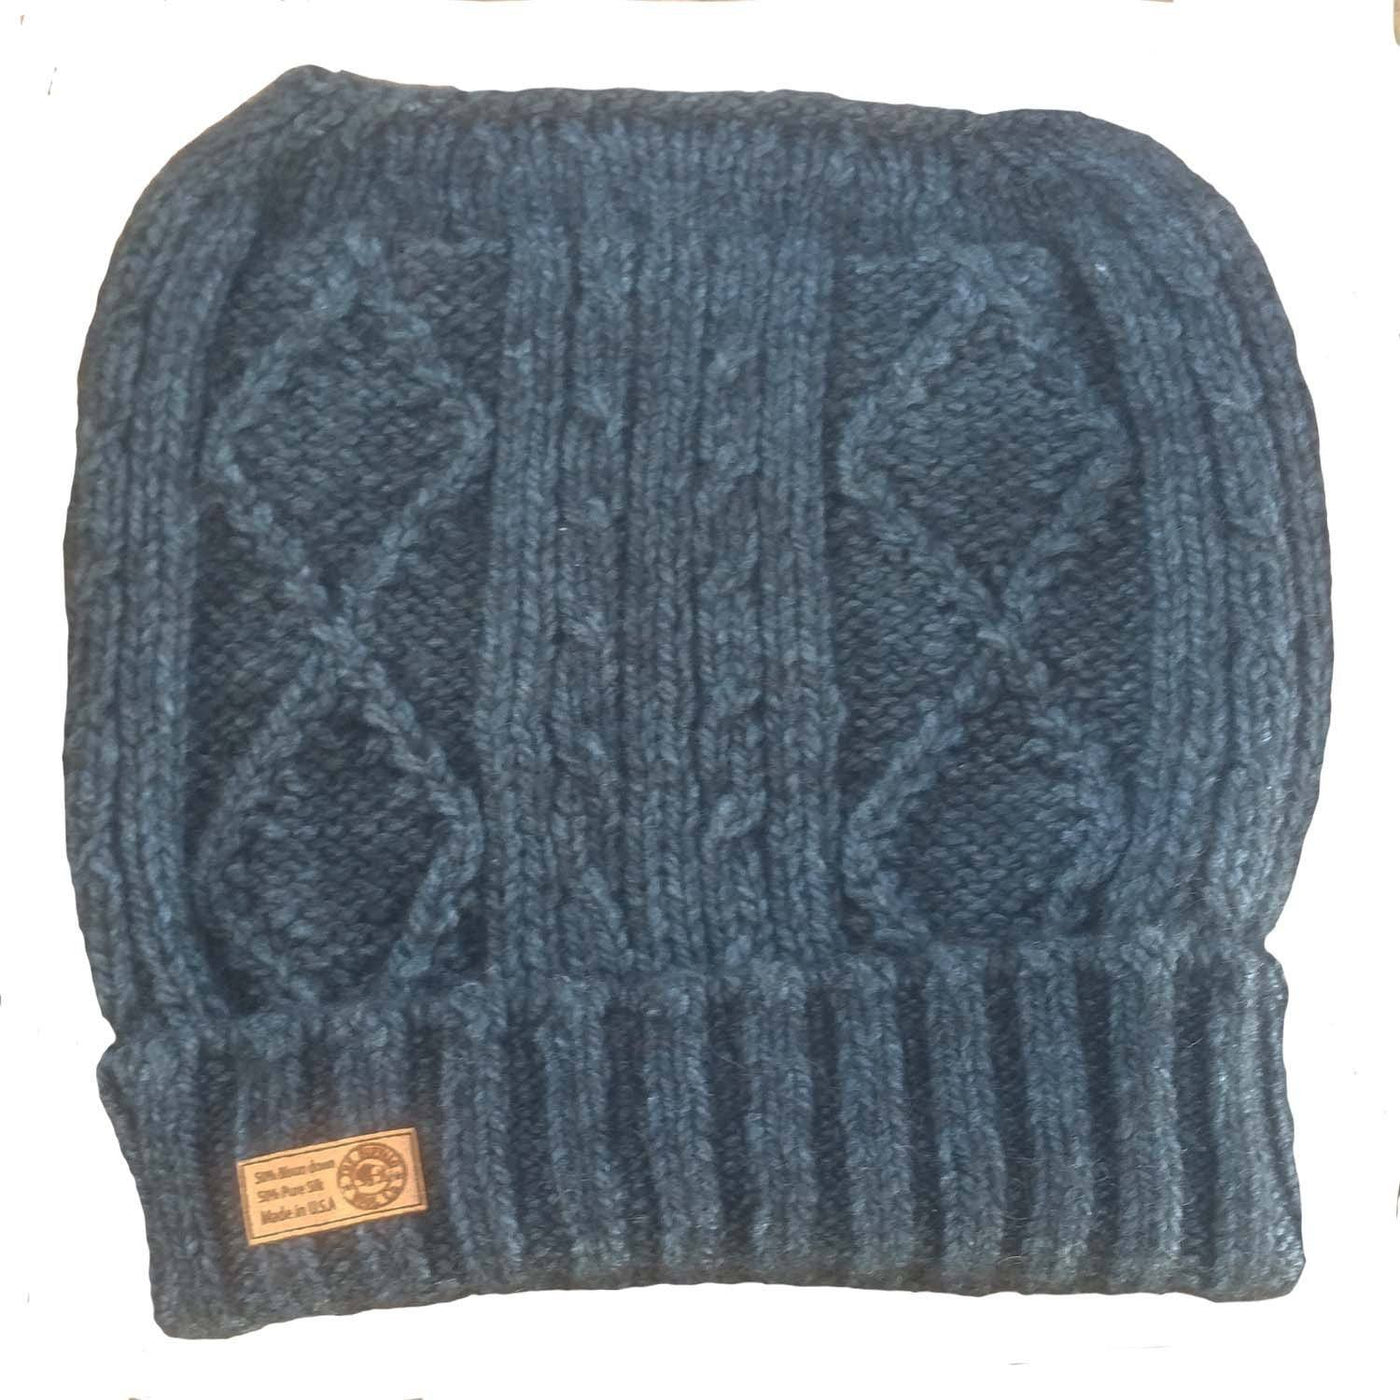 Diamond cabled knitted messy bun hat - Bison & Silk Bison Gear The Buffalo Wool Co. Blue 